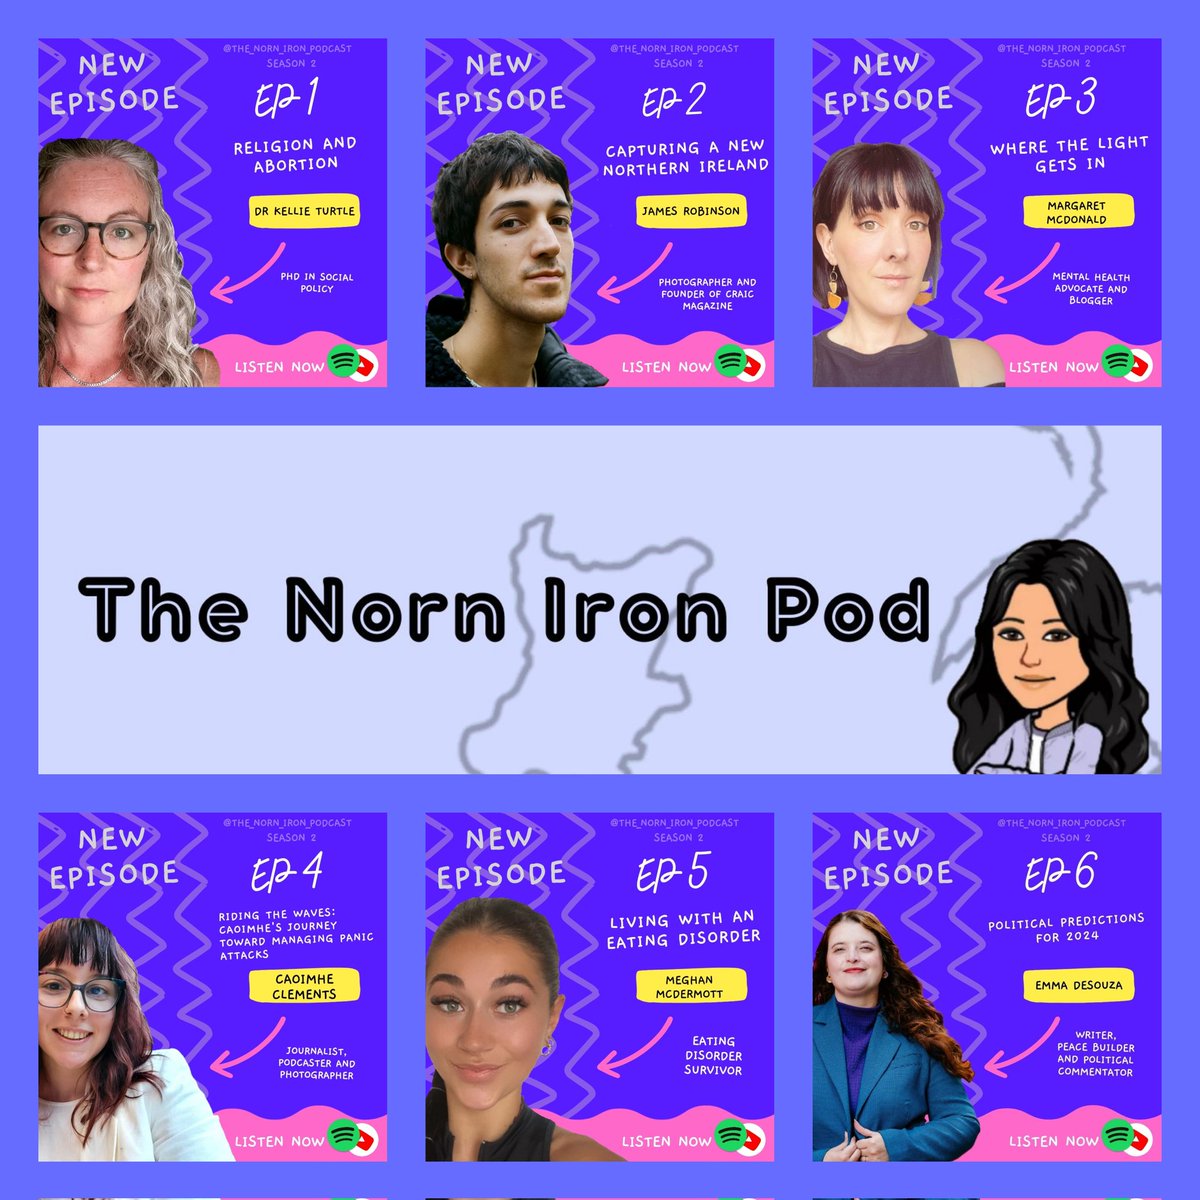 Thank you so much to all the guests who have shared their experiences and perspectives!

The first episode of Season 2 part 2 is estimated to be released on Monday 19th of Feburary,

If anyone is interested on coming onto the podcast, send me a message!

#northernireland